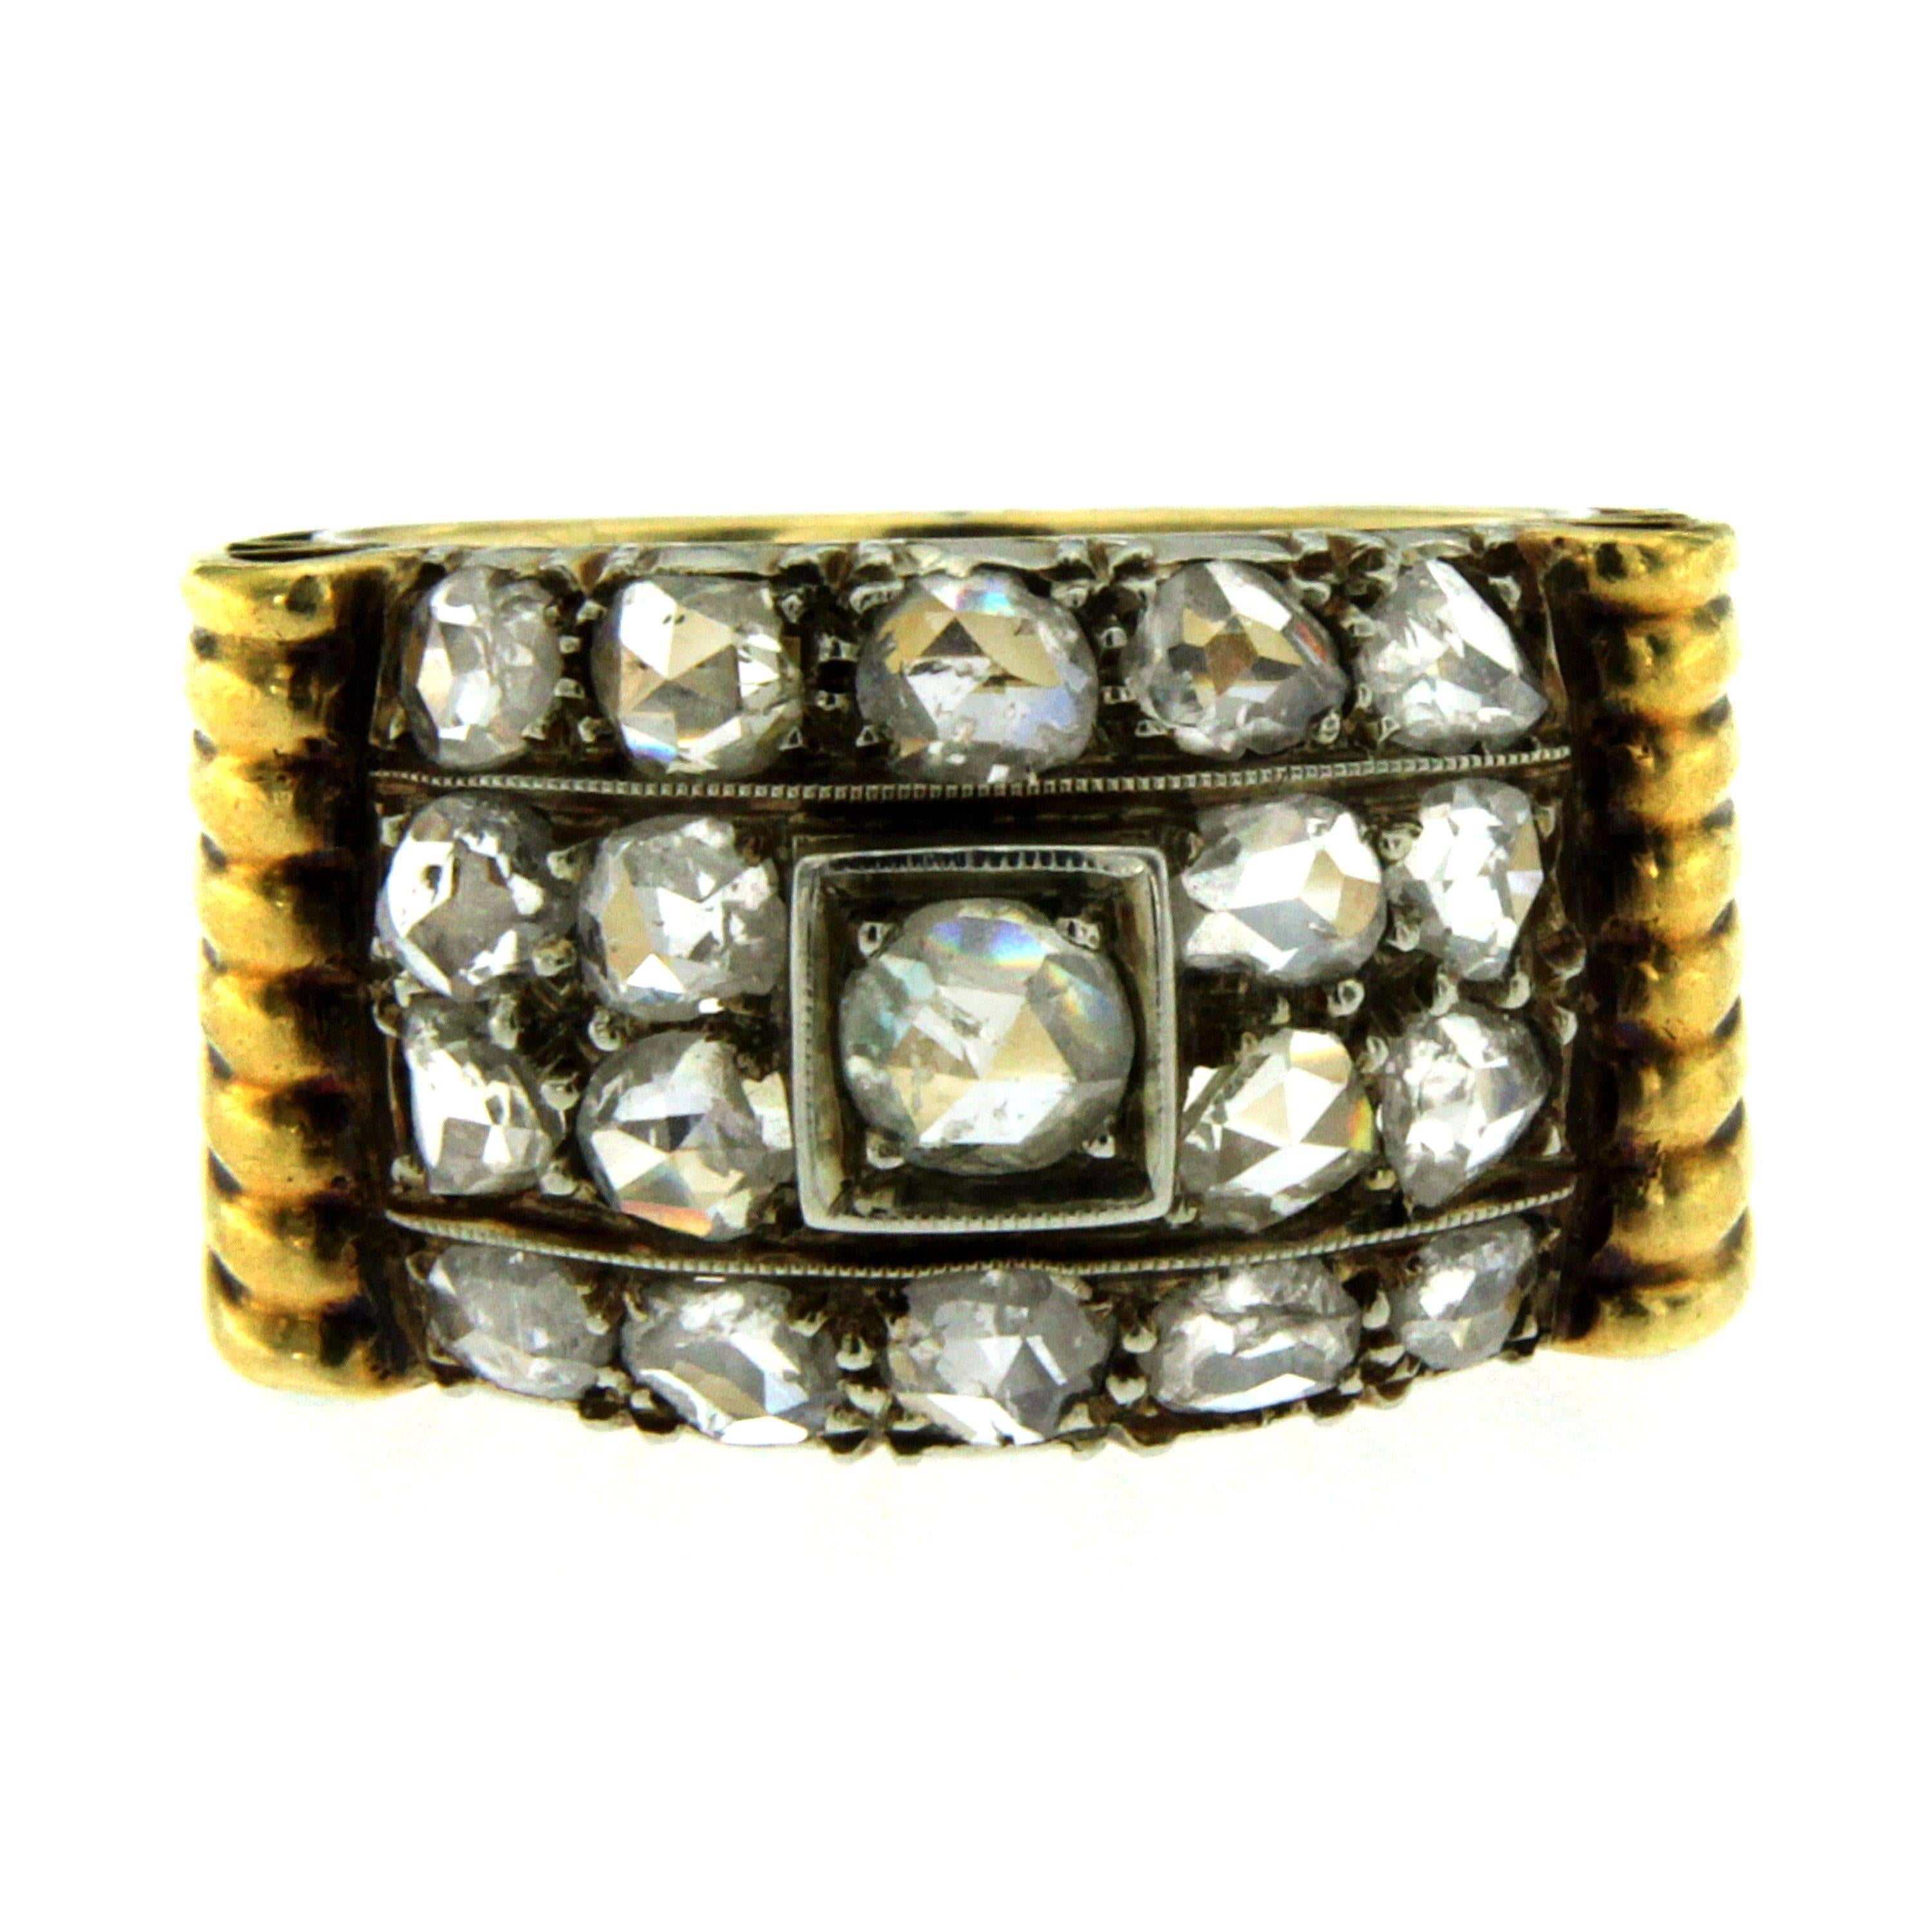 An Authentic Retro ring, original from 1940, made in Italy, mounted in 18k yellow and white gold.

The ring has a wide, textured band comprised of ridged grooves that travel around the entire outer surface, in the center there are three horizontal